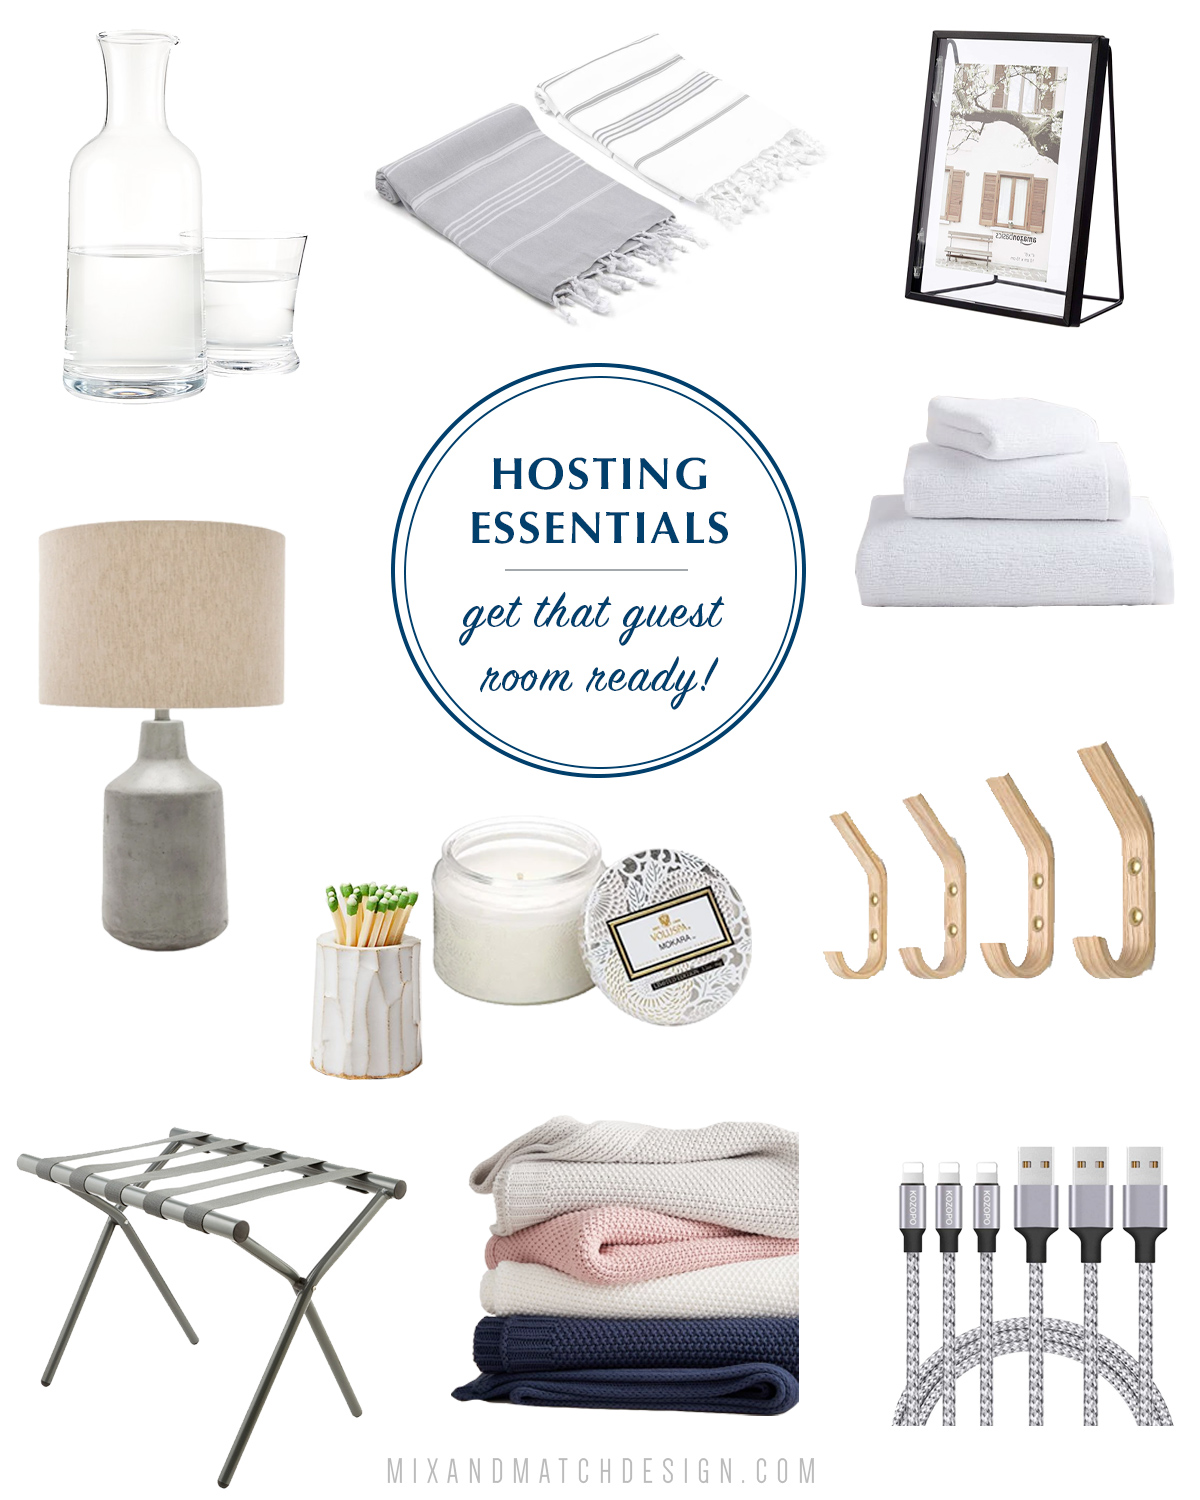 Hosting Essentials for the Guest Room